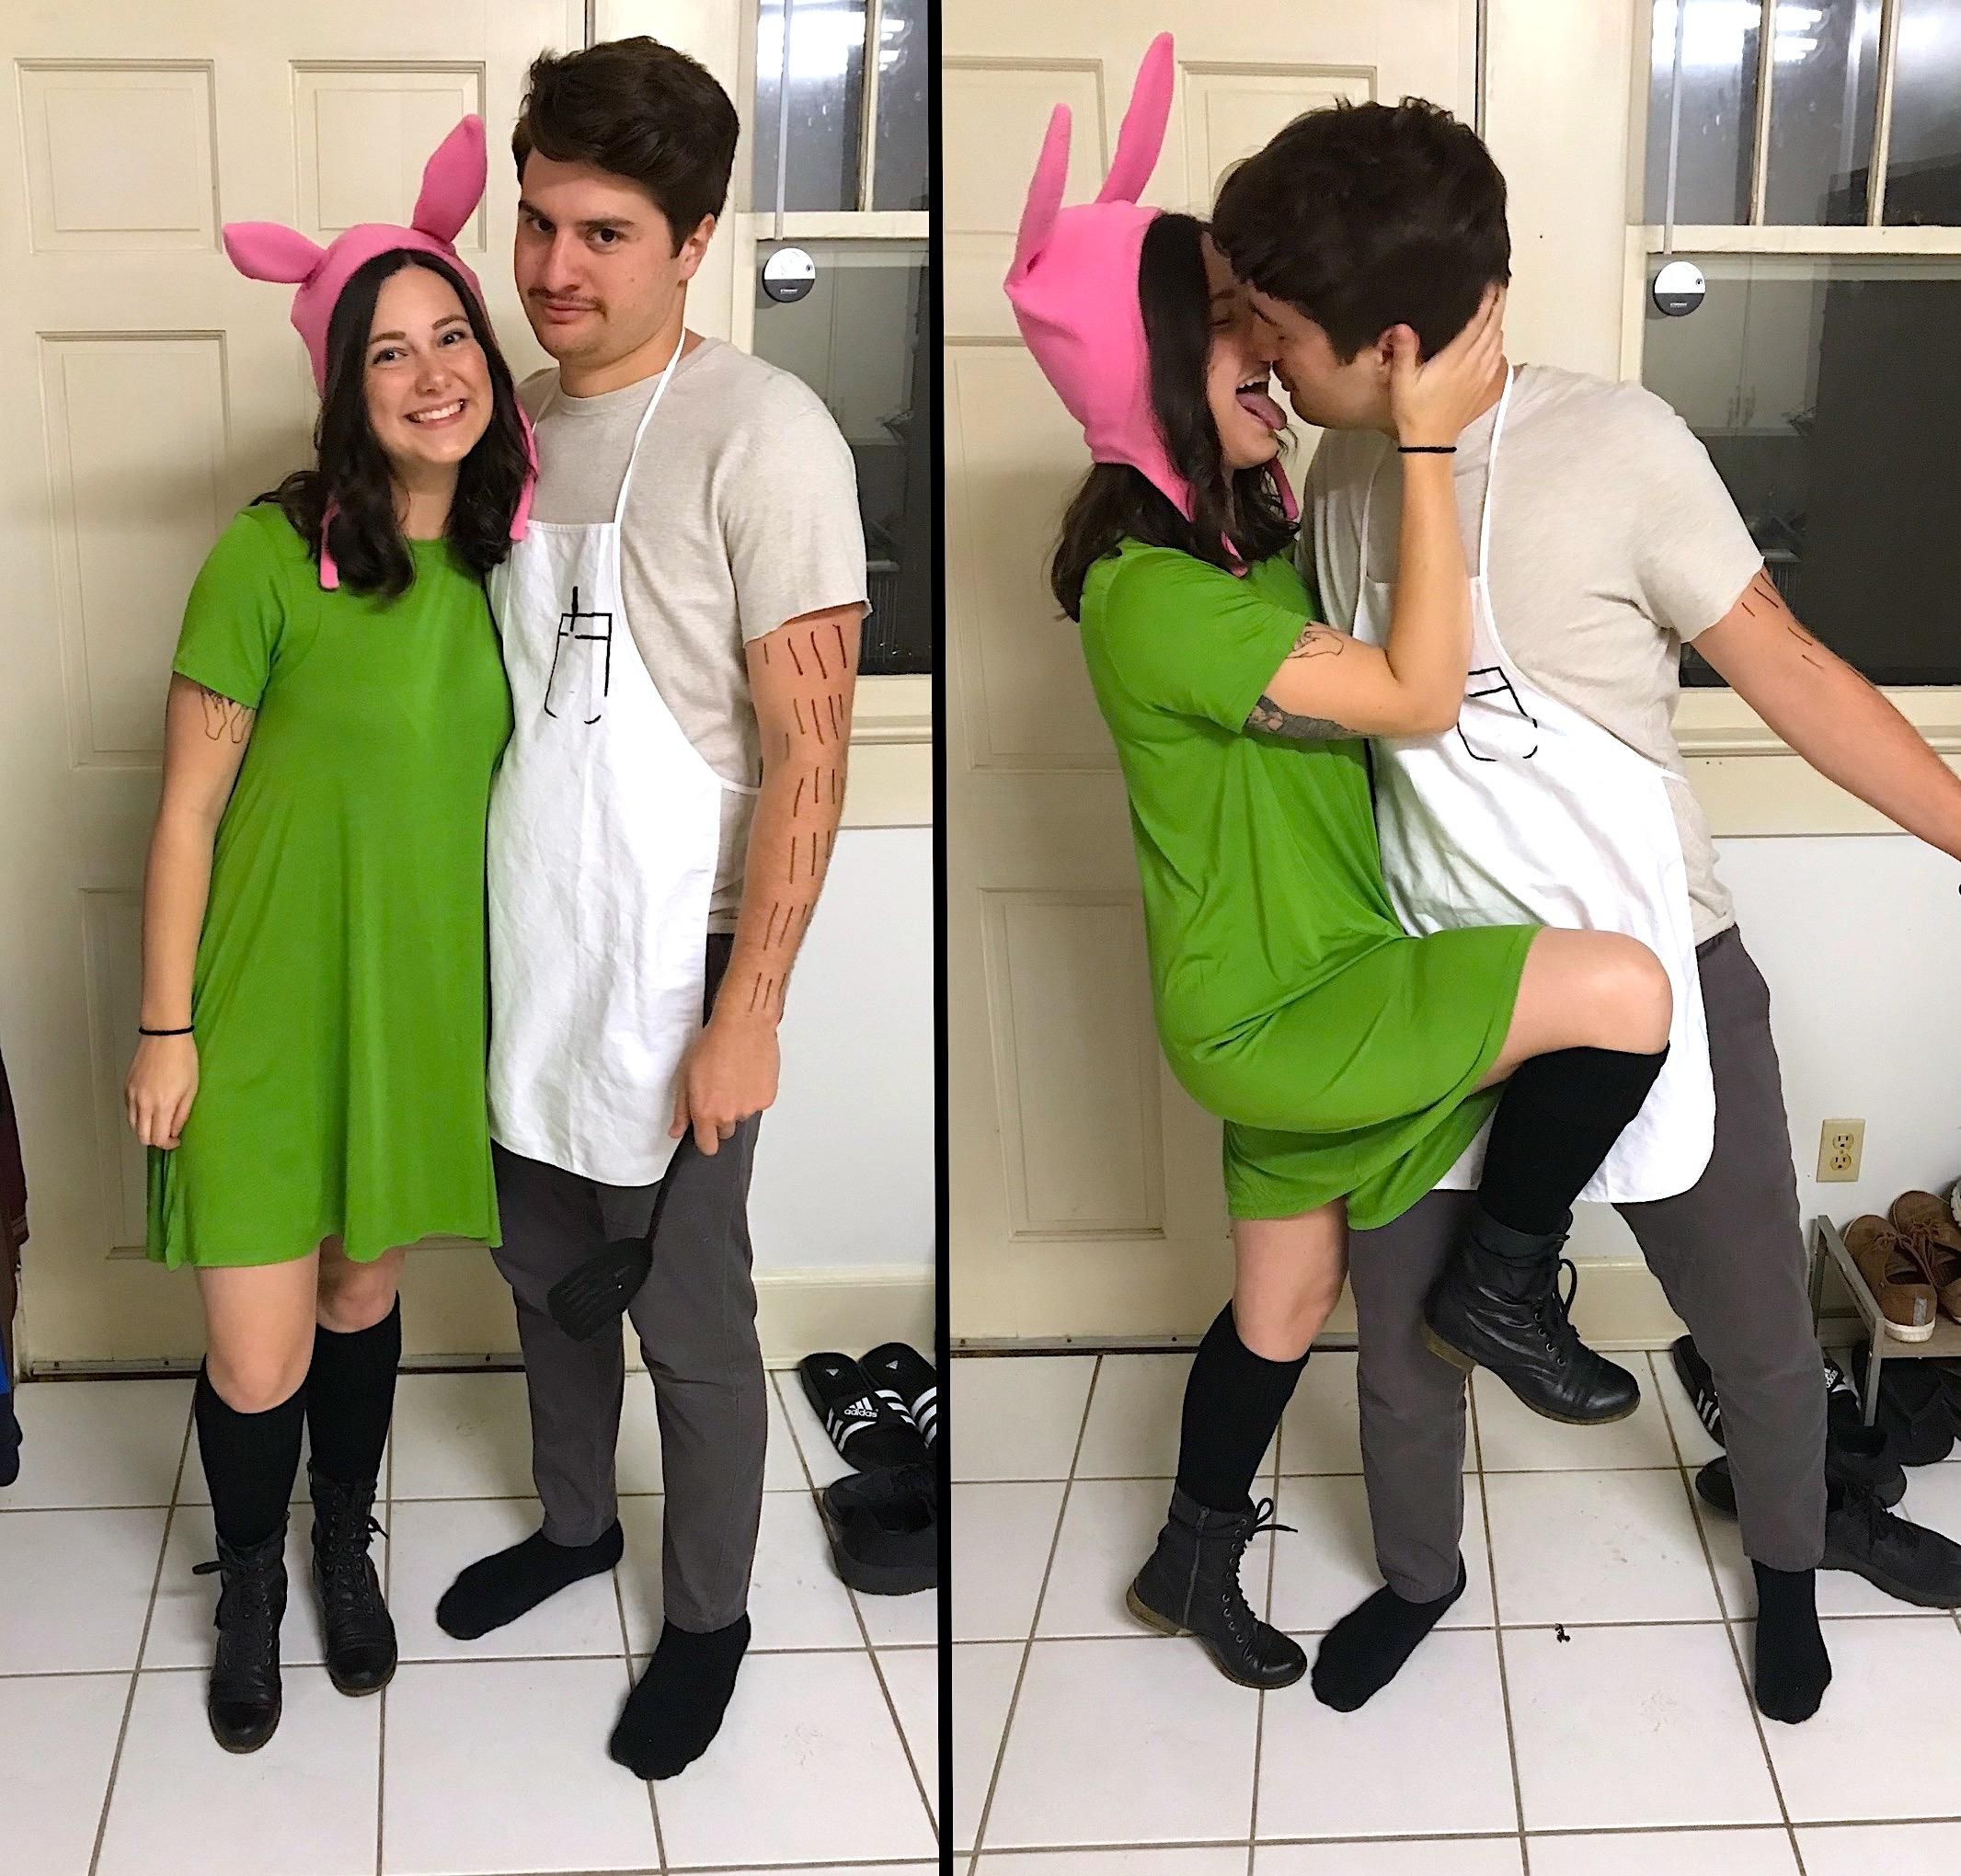 My girlfriend and I went full Bob's Burgers along with some friends for Halloween last night, somehow didn't realize the incestual implications until afterwards